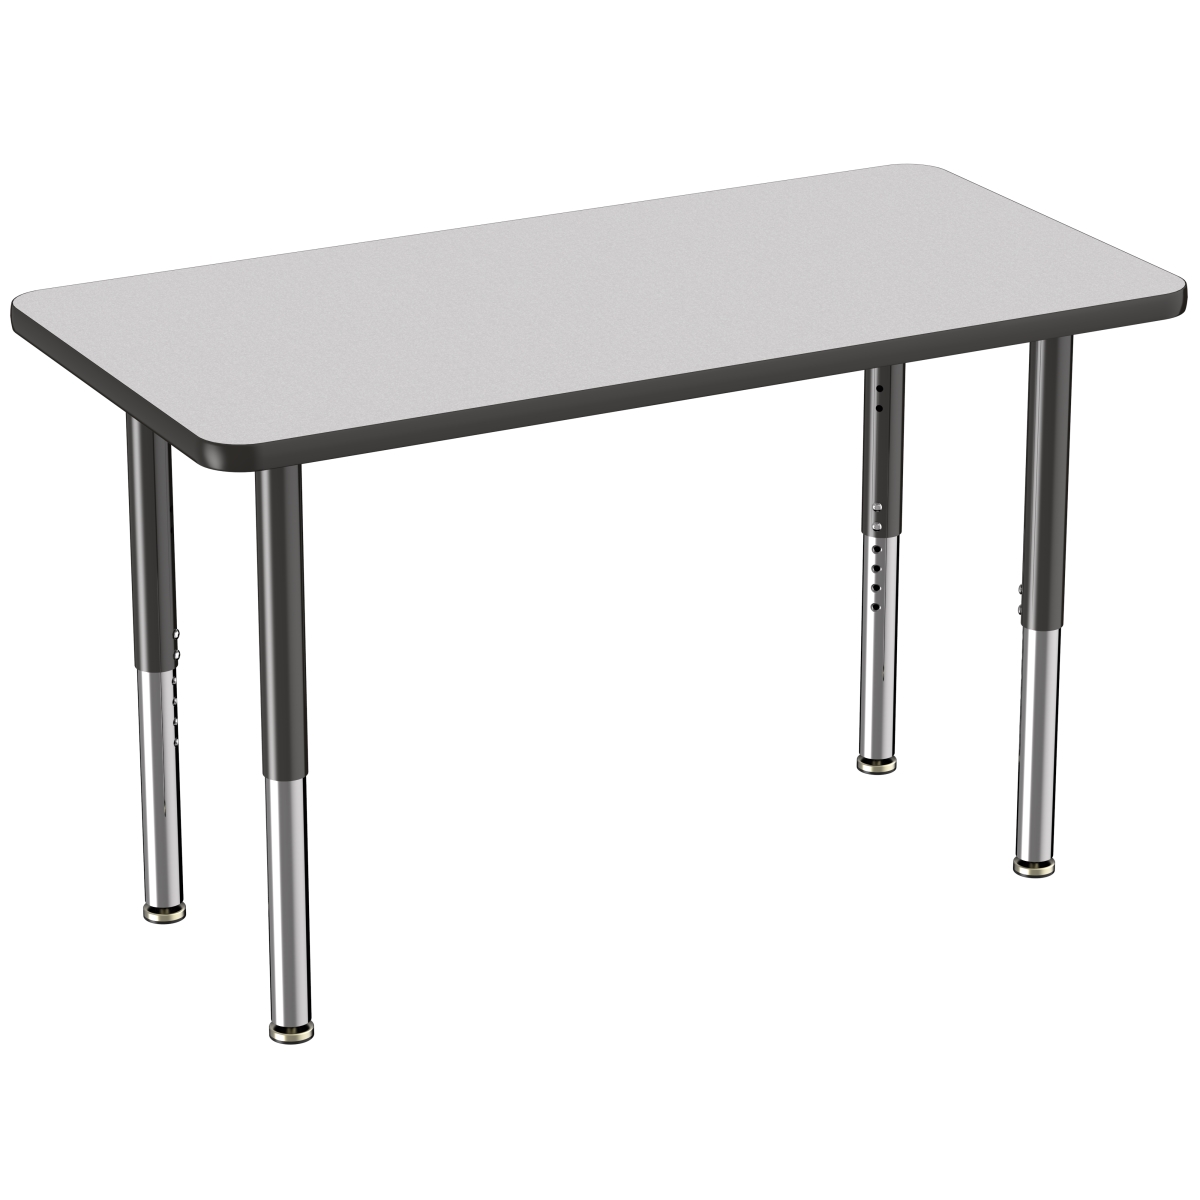 10010-gybk 24 X 48 In. Rectangle T-mold Adjustable Activity Table With Super Leg - Grey & Black